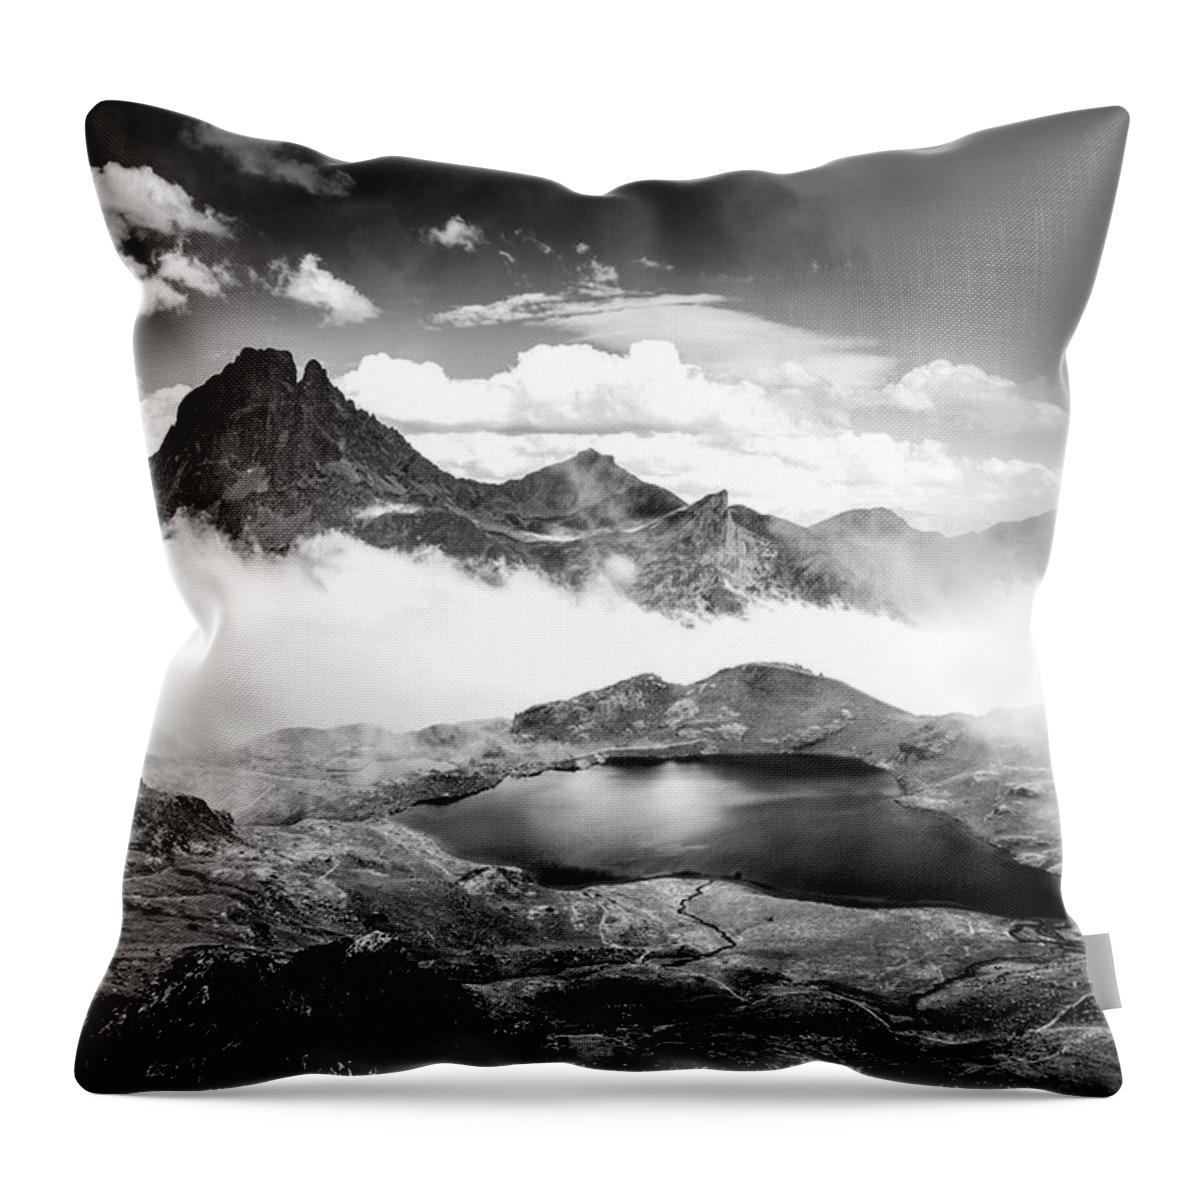 Estock Throw Pillow featuring the digital art Lake Surrounded By Mountains #1 by Francesco Carovillano